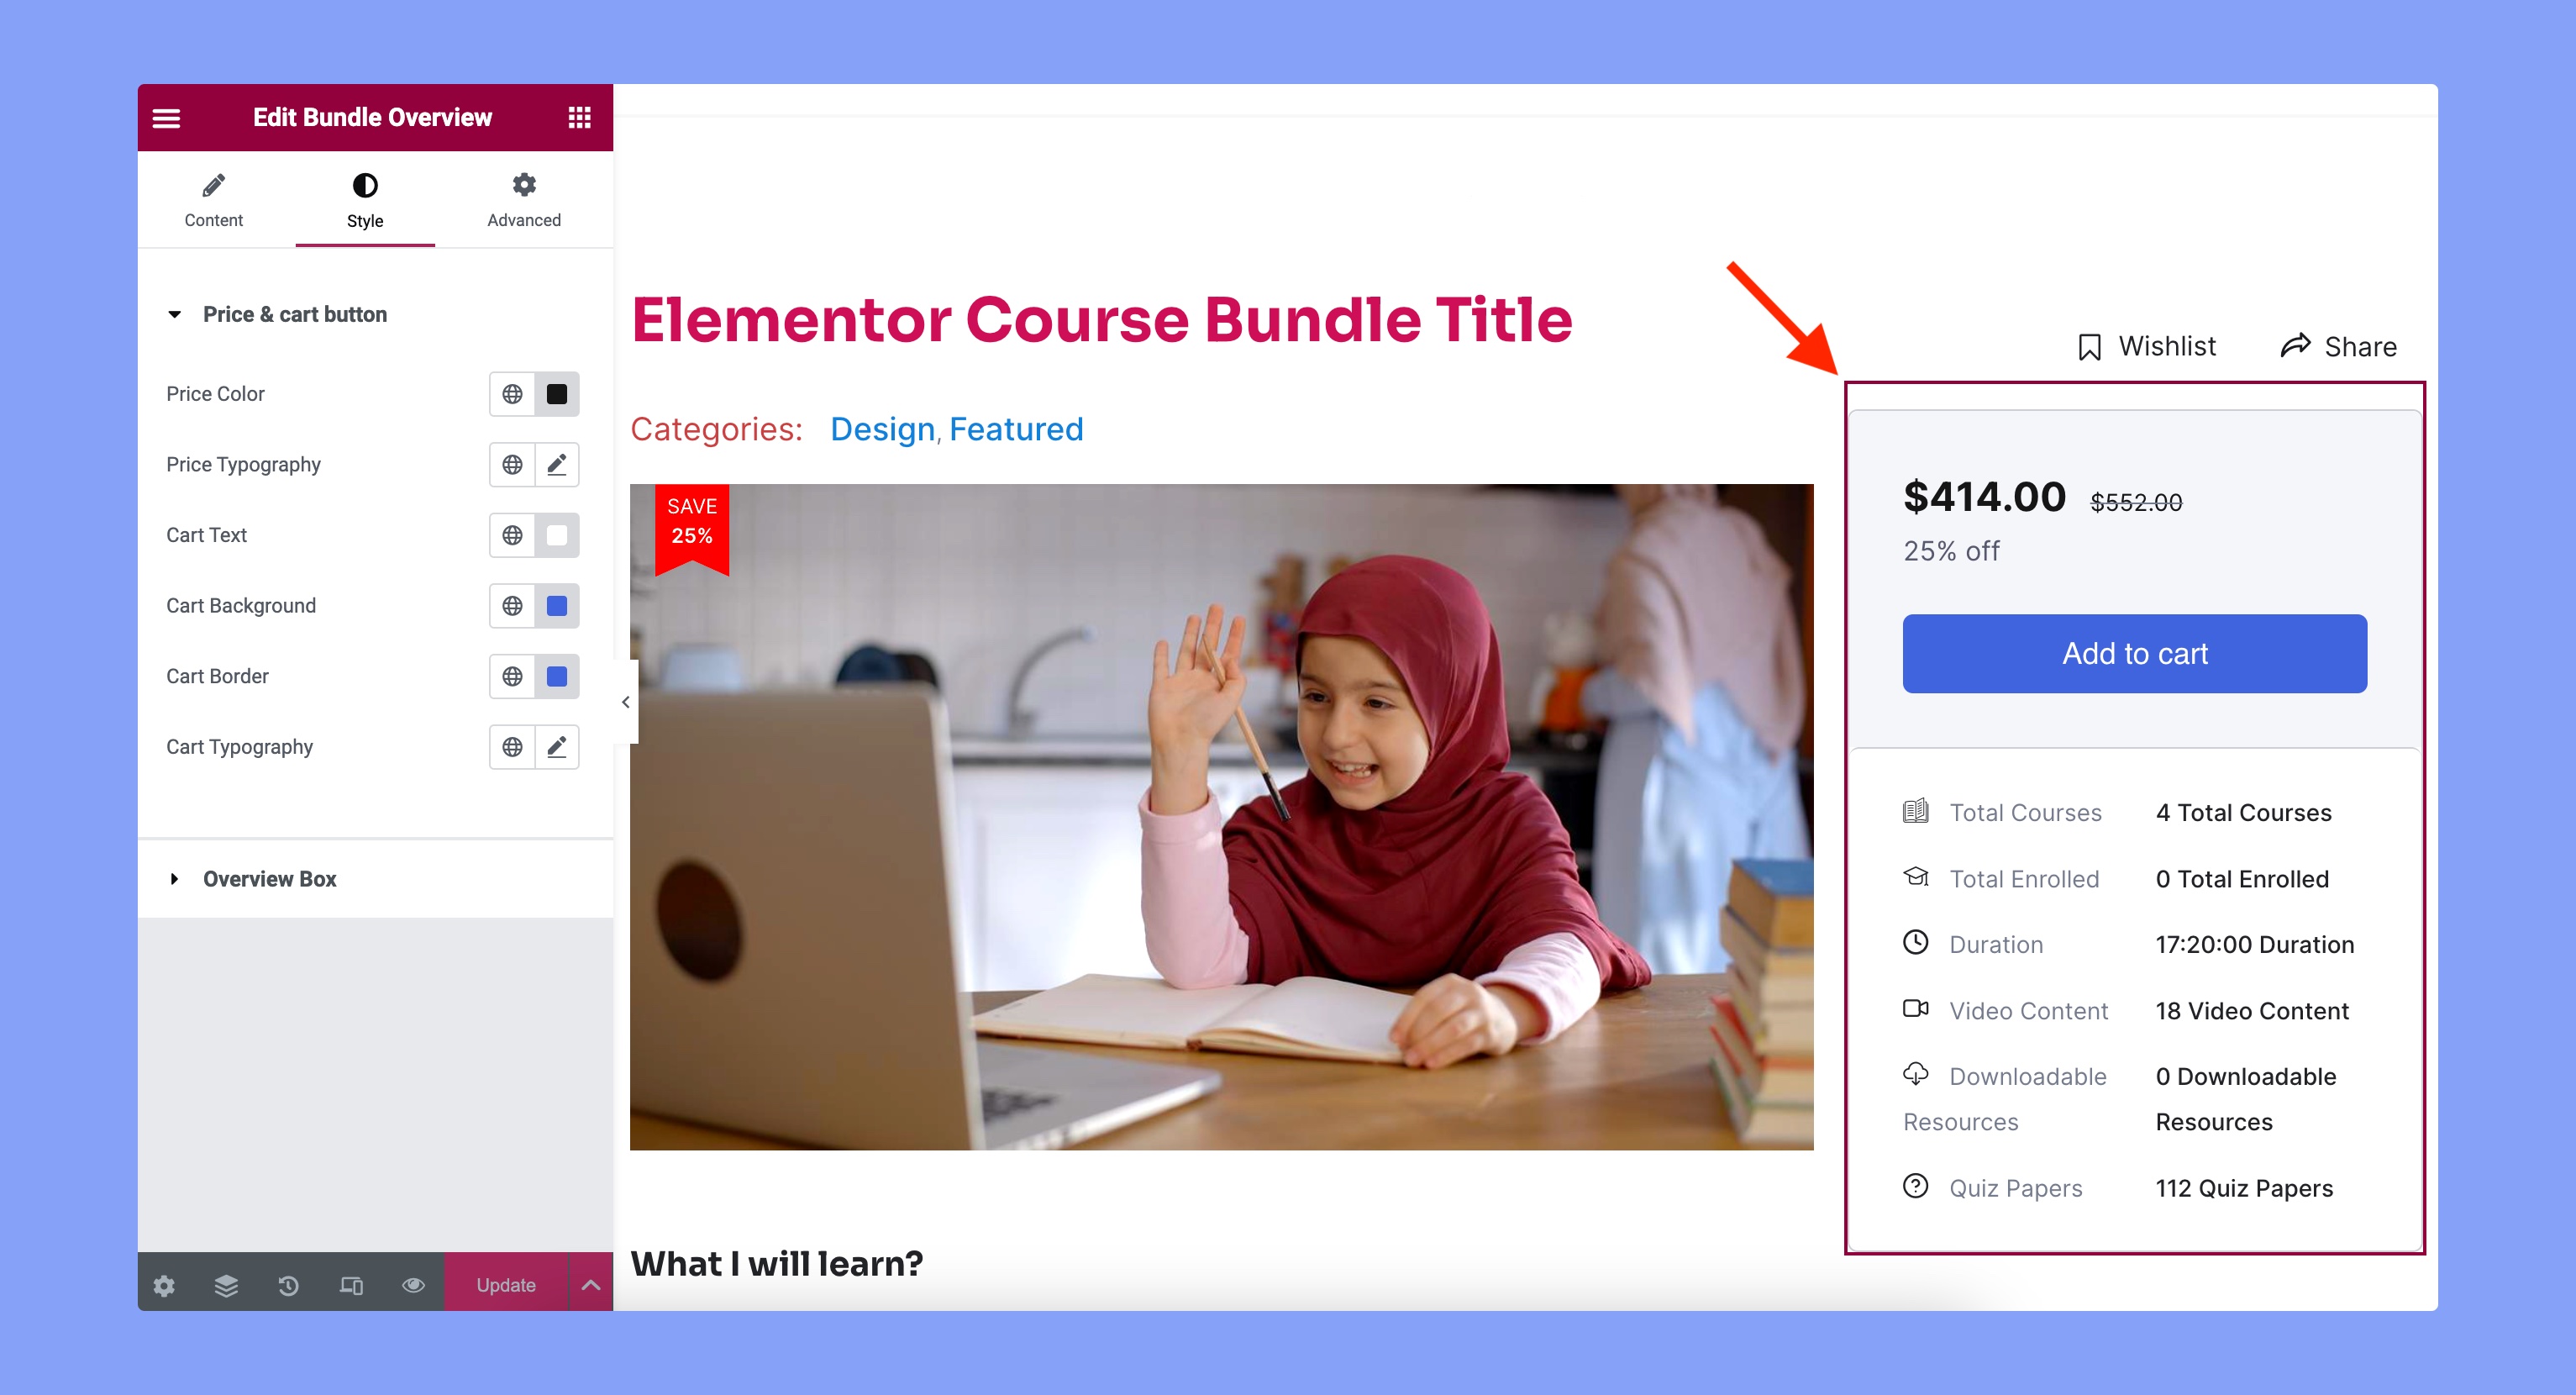 Price and cart button settings of Tutor LMS Elementor Widget Bundle Overview 